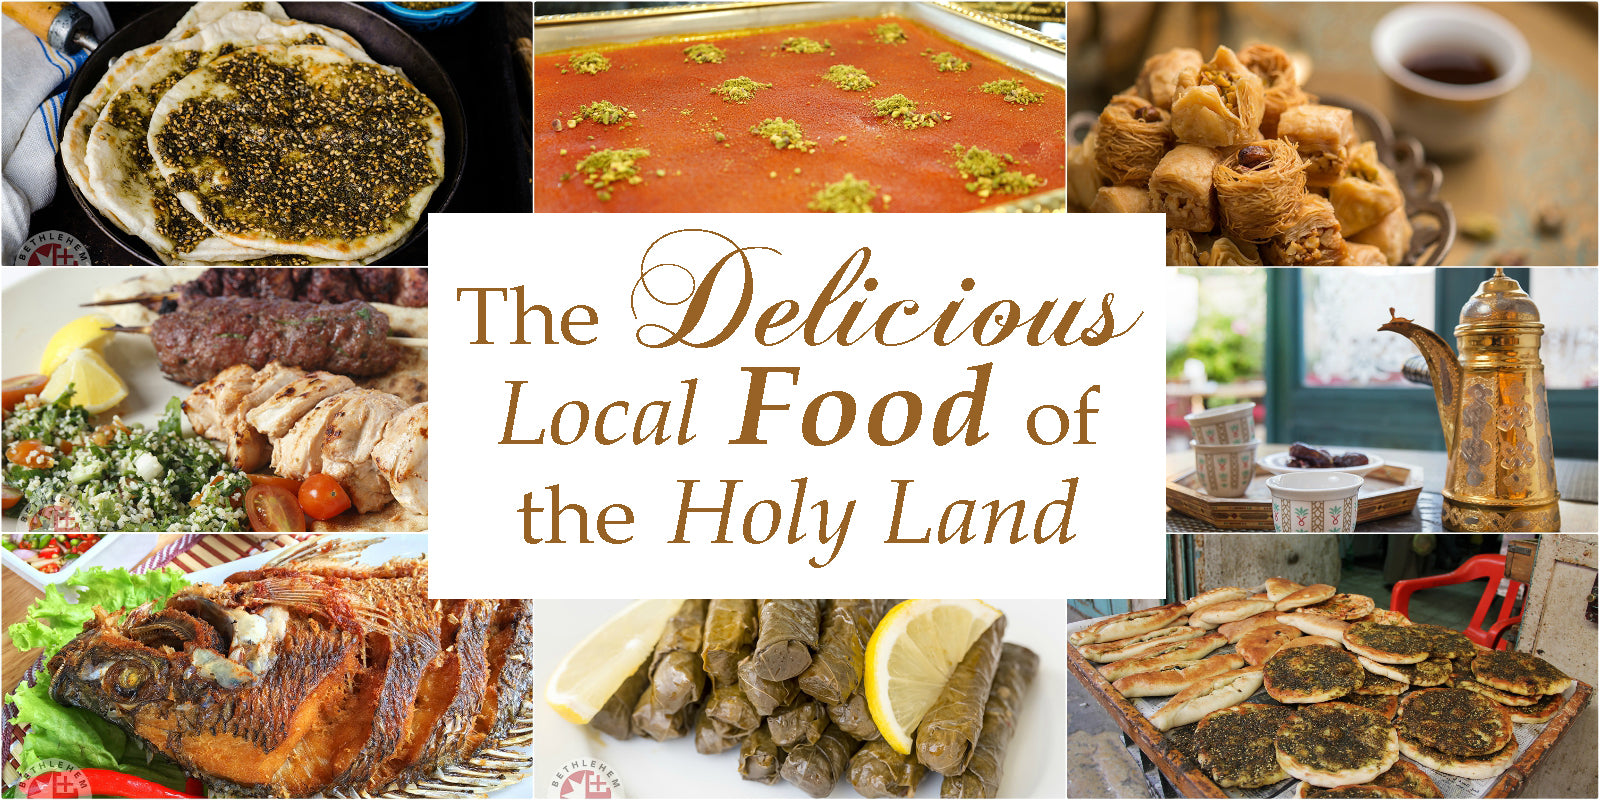 The Delicious Local Food